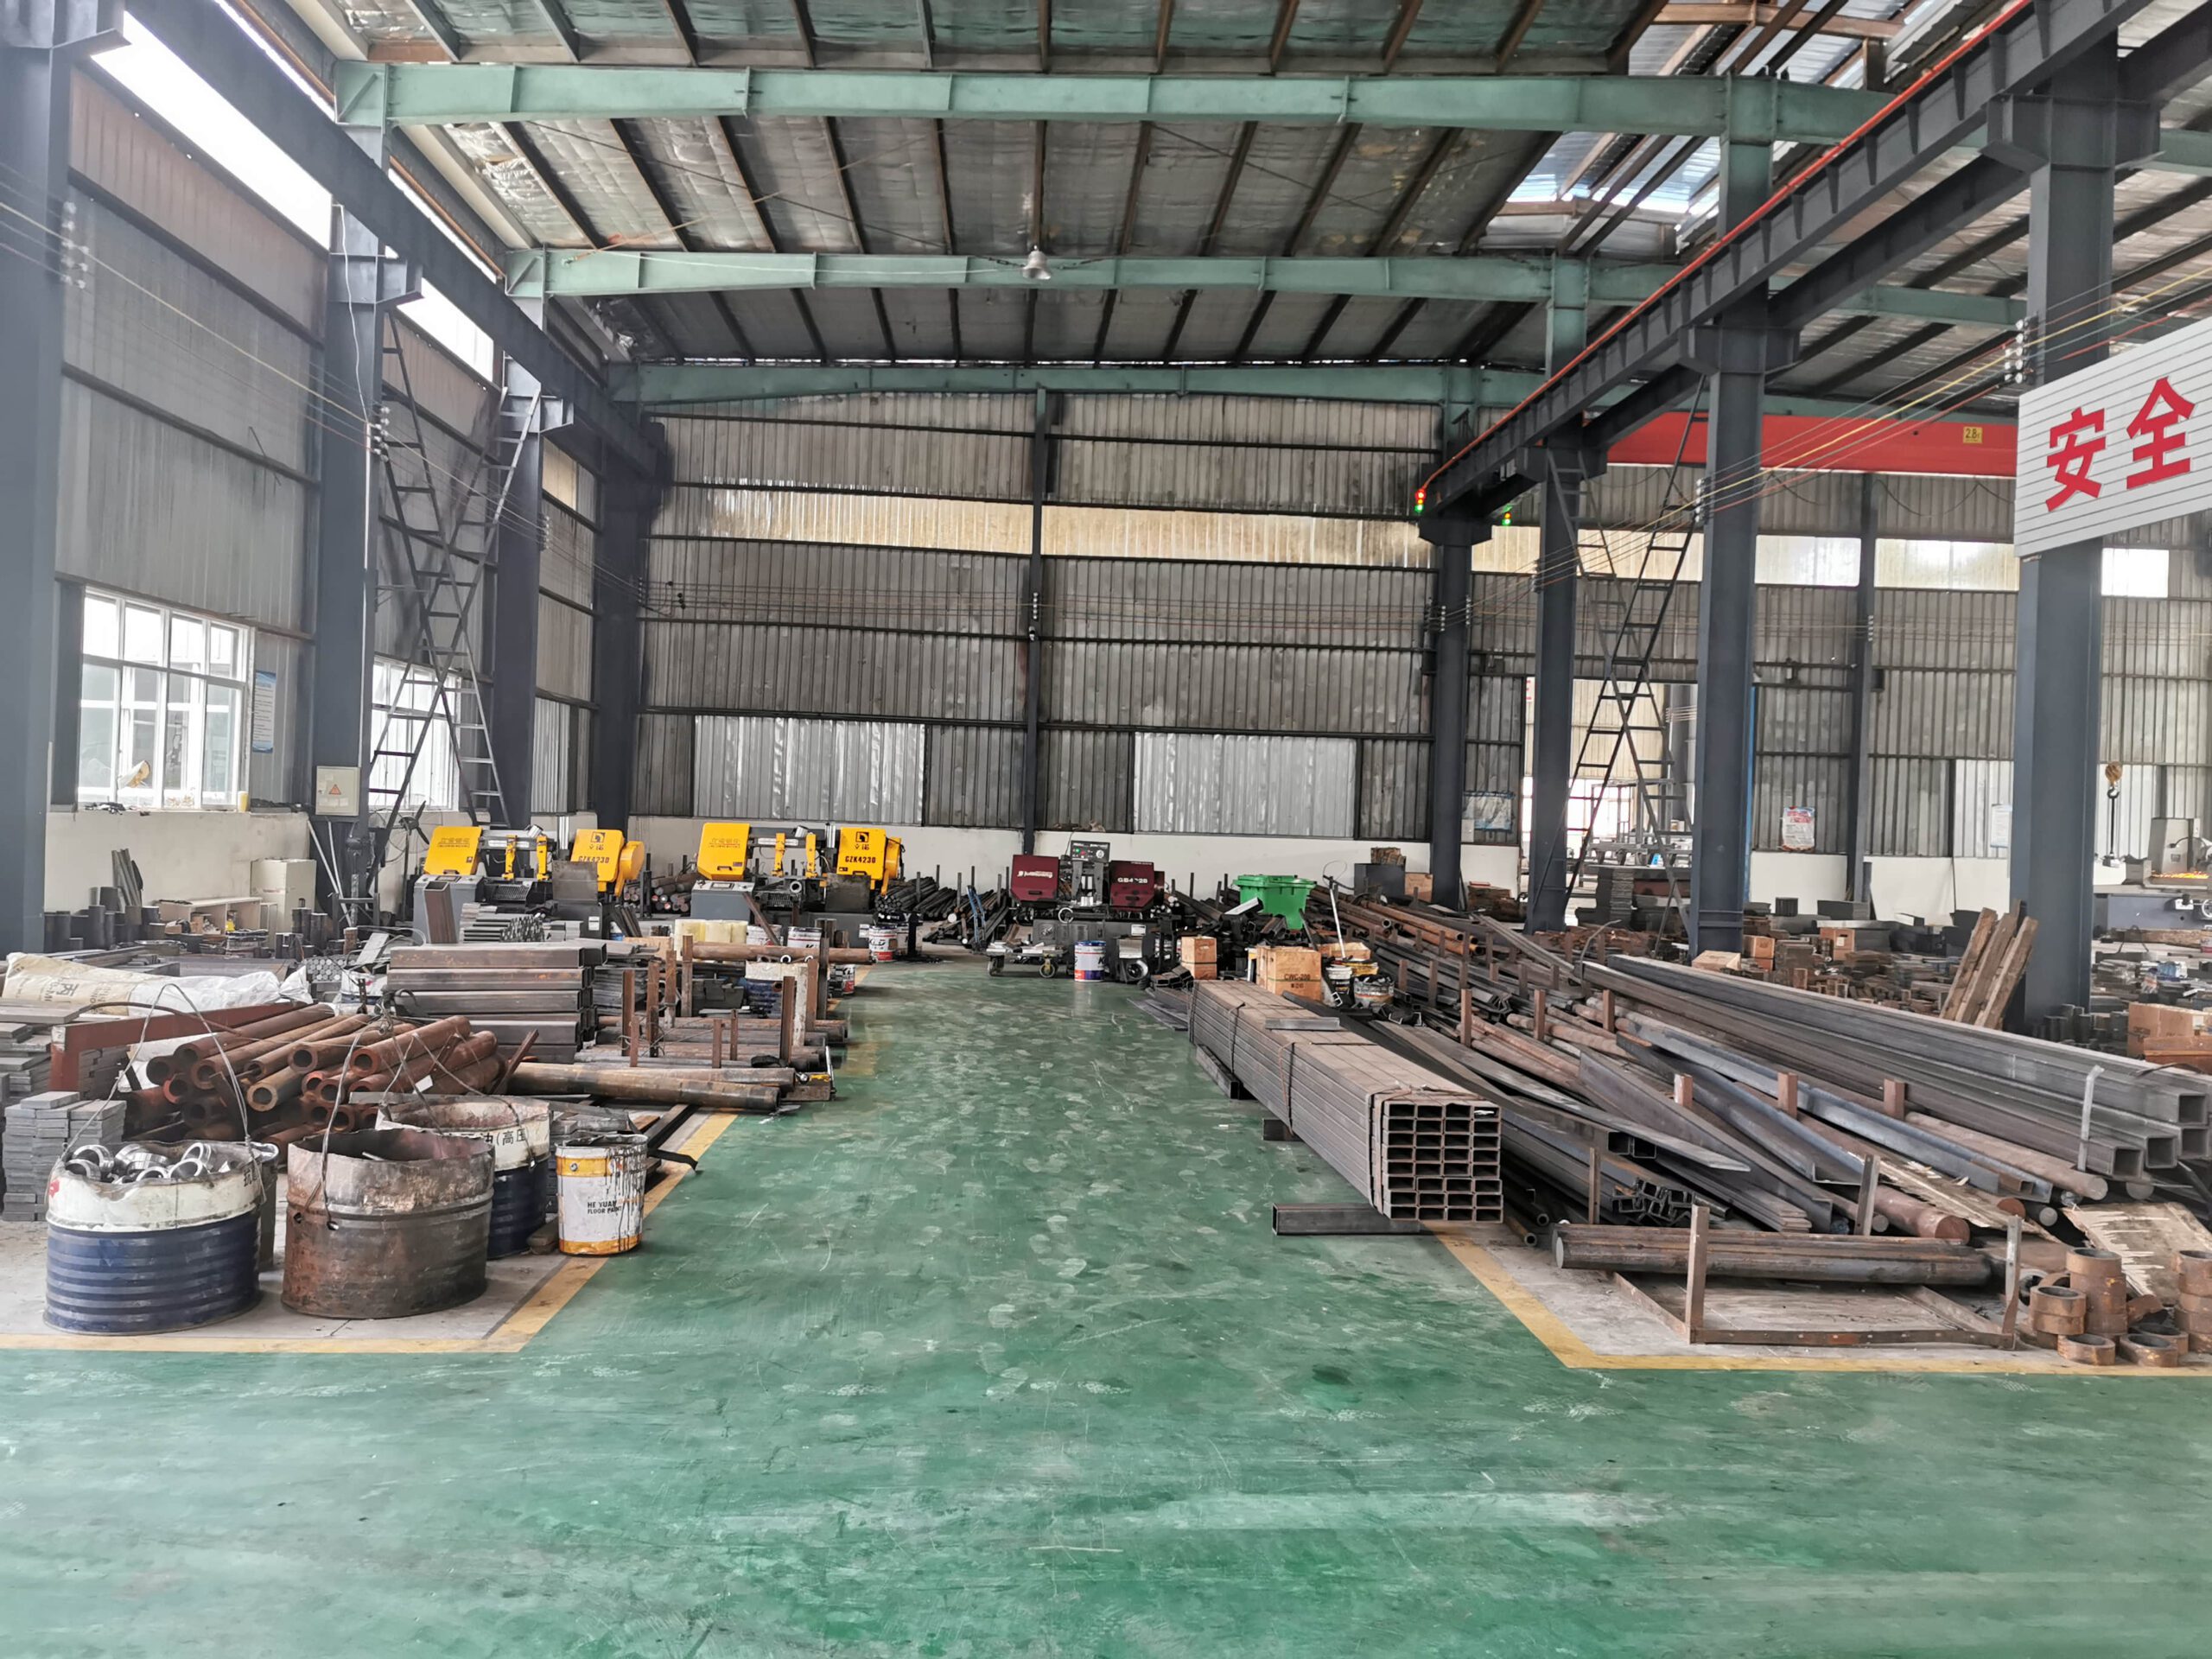 CNC Plasma Cutting Machine Supplier – Find the Best One for You